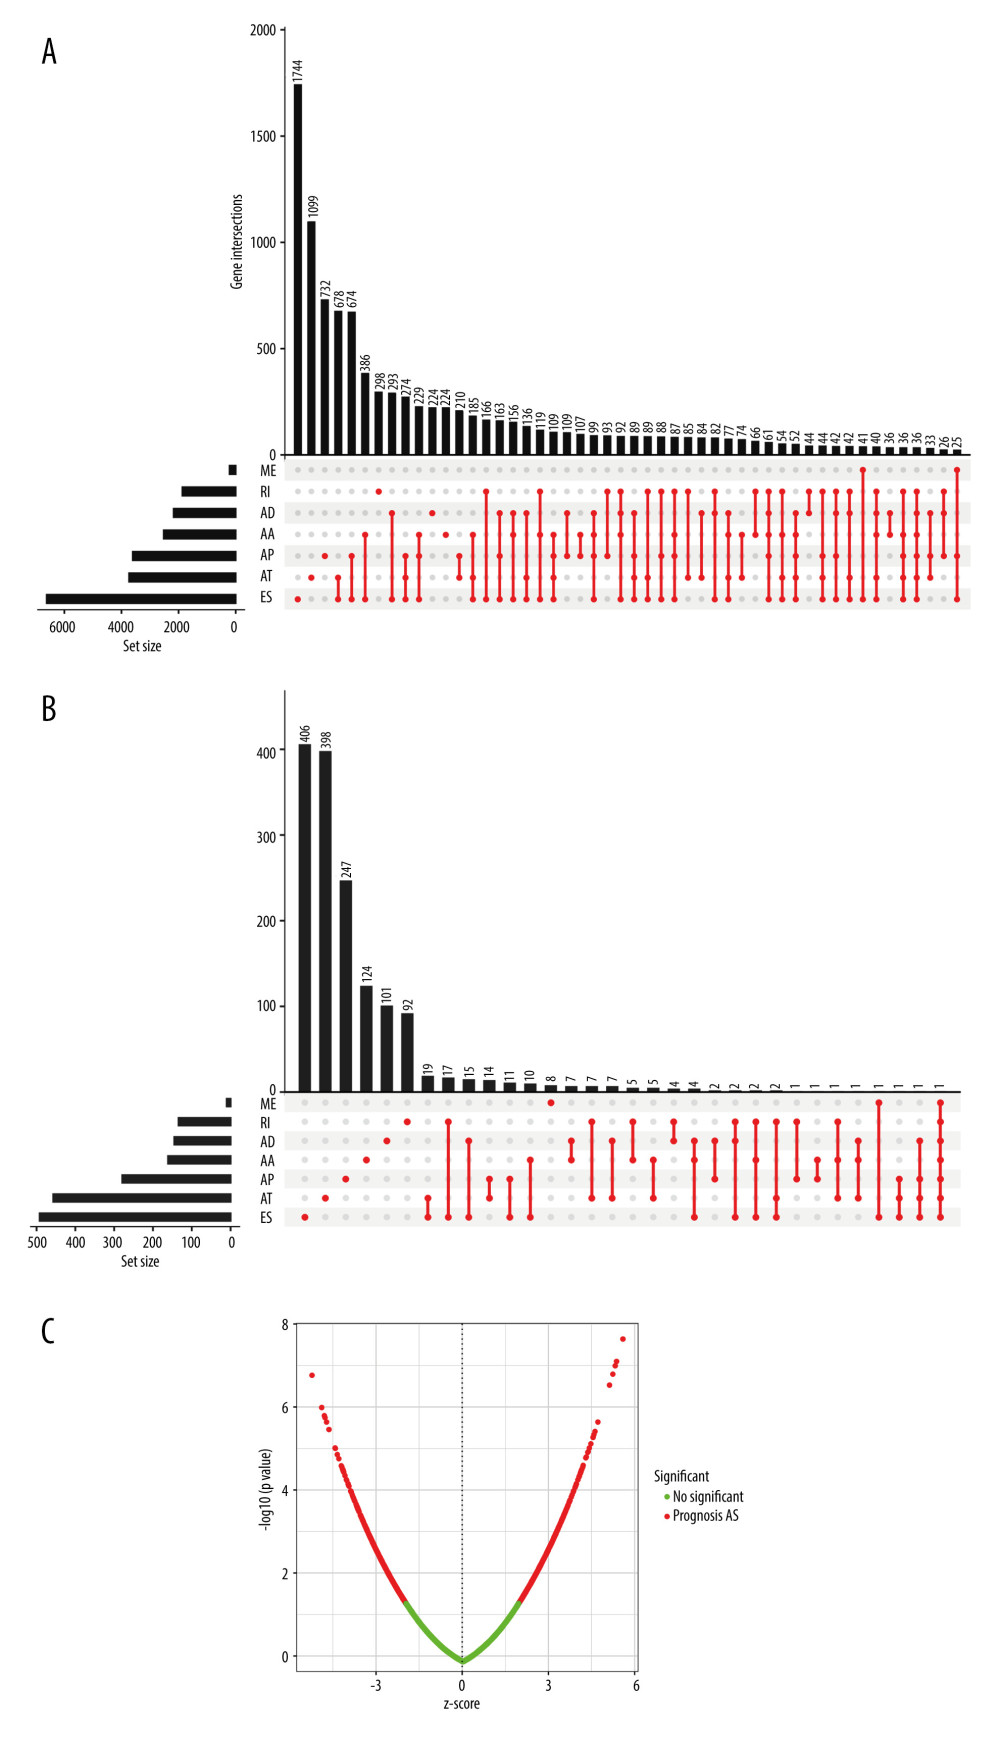 Alternative splicing (AS) of lung adenocarcinoma (LUAD) analysis. (A) UpSet demonstrates the interaction of AS events. (B) UpSet demonstrates the interaction of Prognosis-related AS events. (C) Volcano plot to show prognosis-related AS events. R Software version 4.0.3 (https://www.r-project.org/).